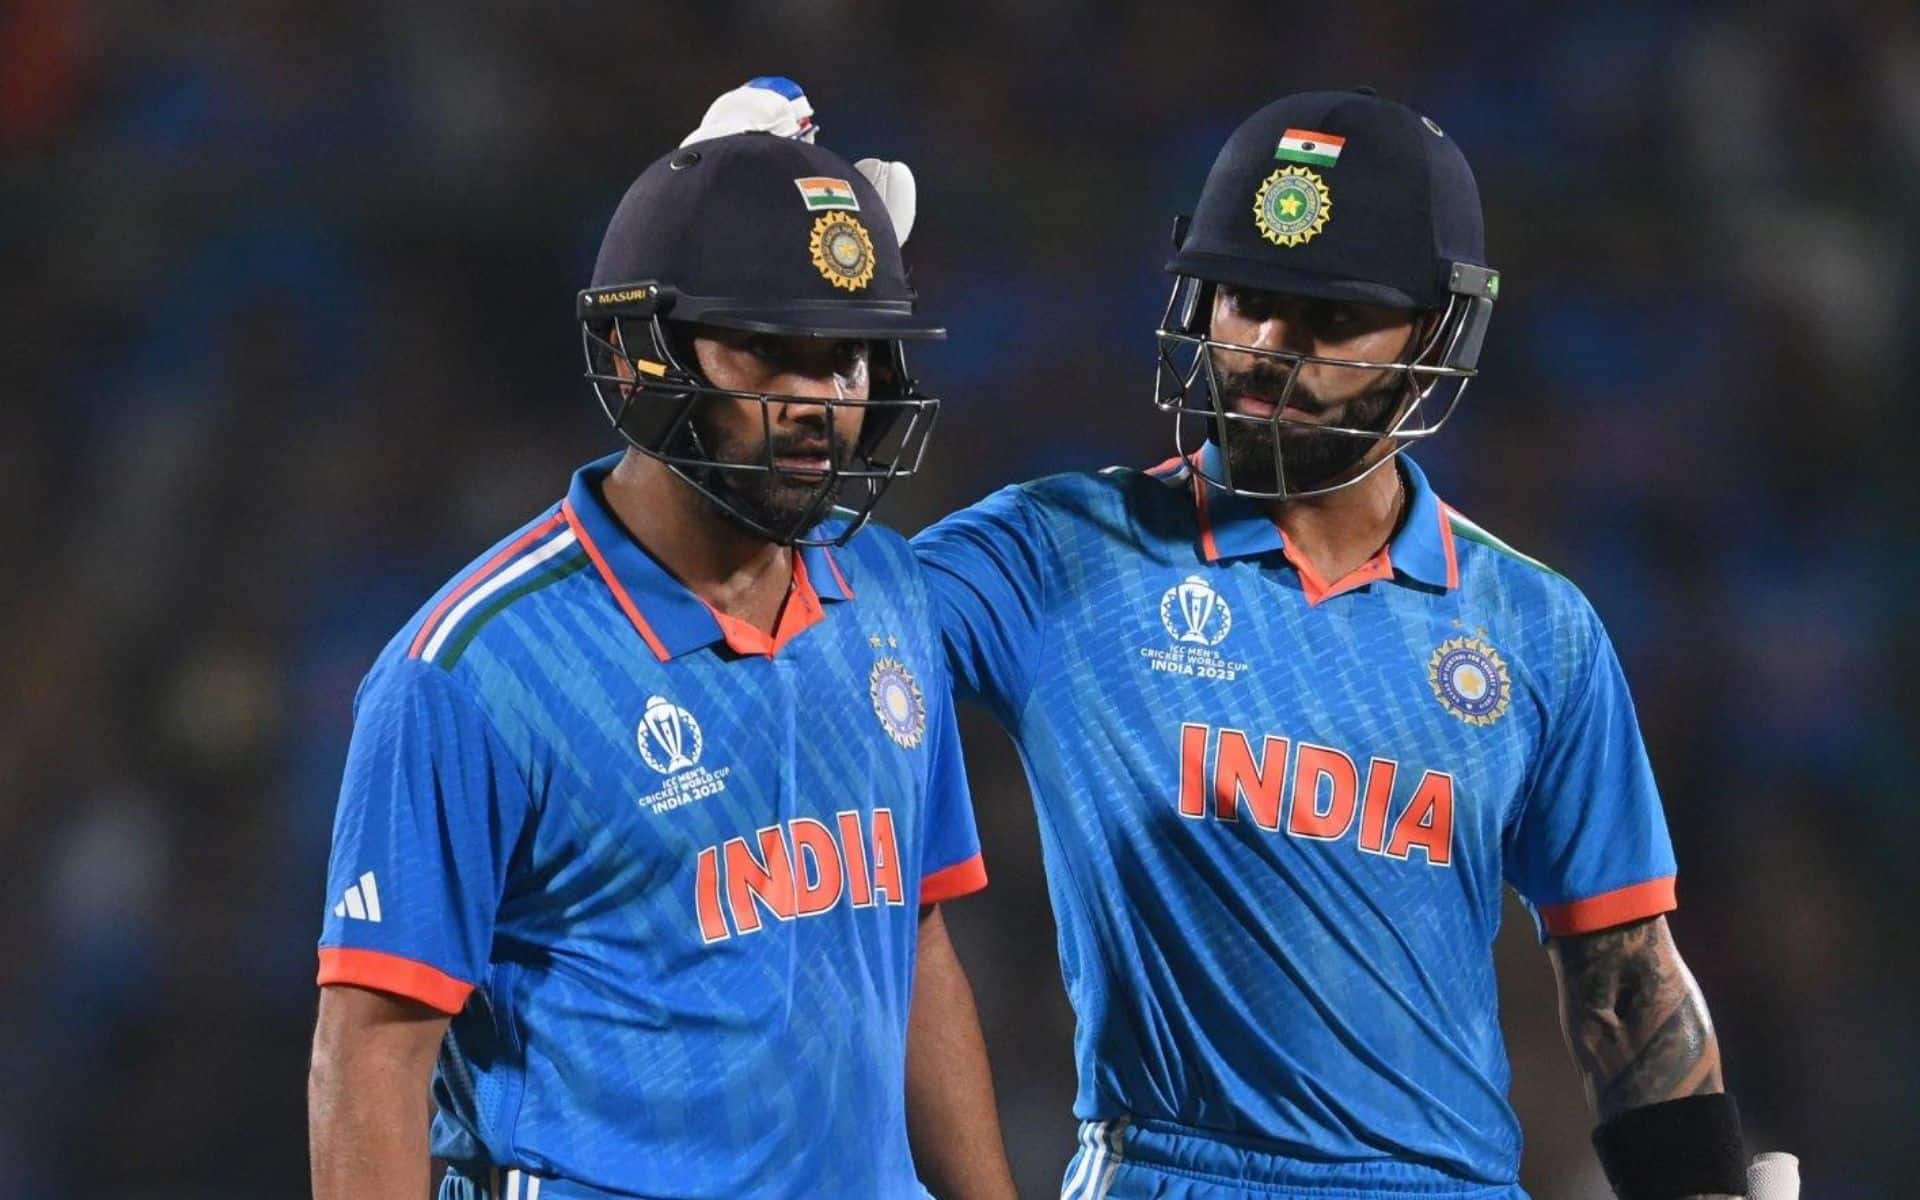 Sanjay Manjrekar expects Kohli & Rohit to open for India in T20 WC (x.com)